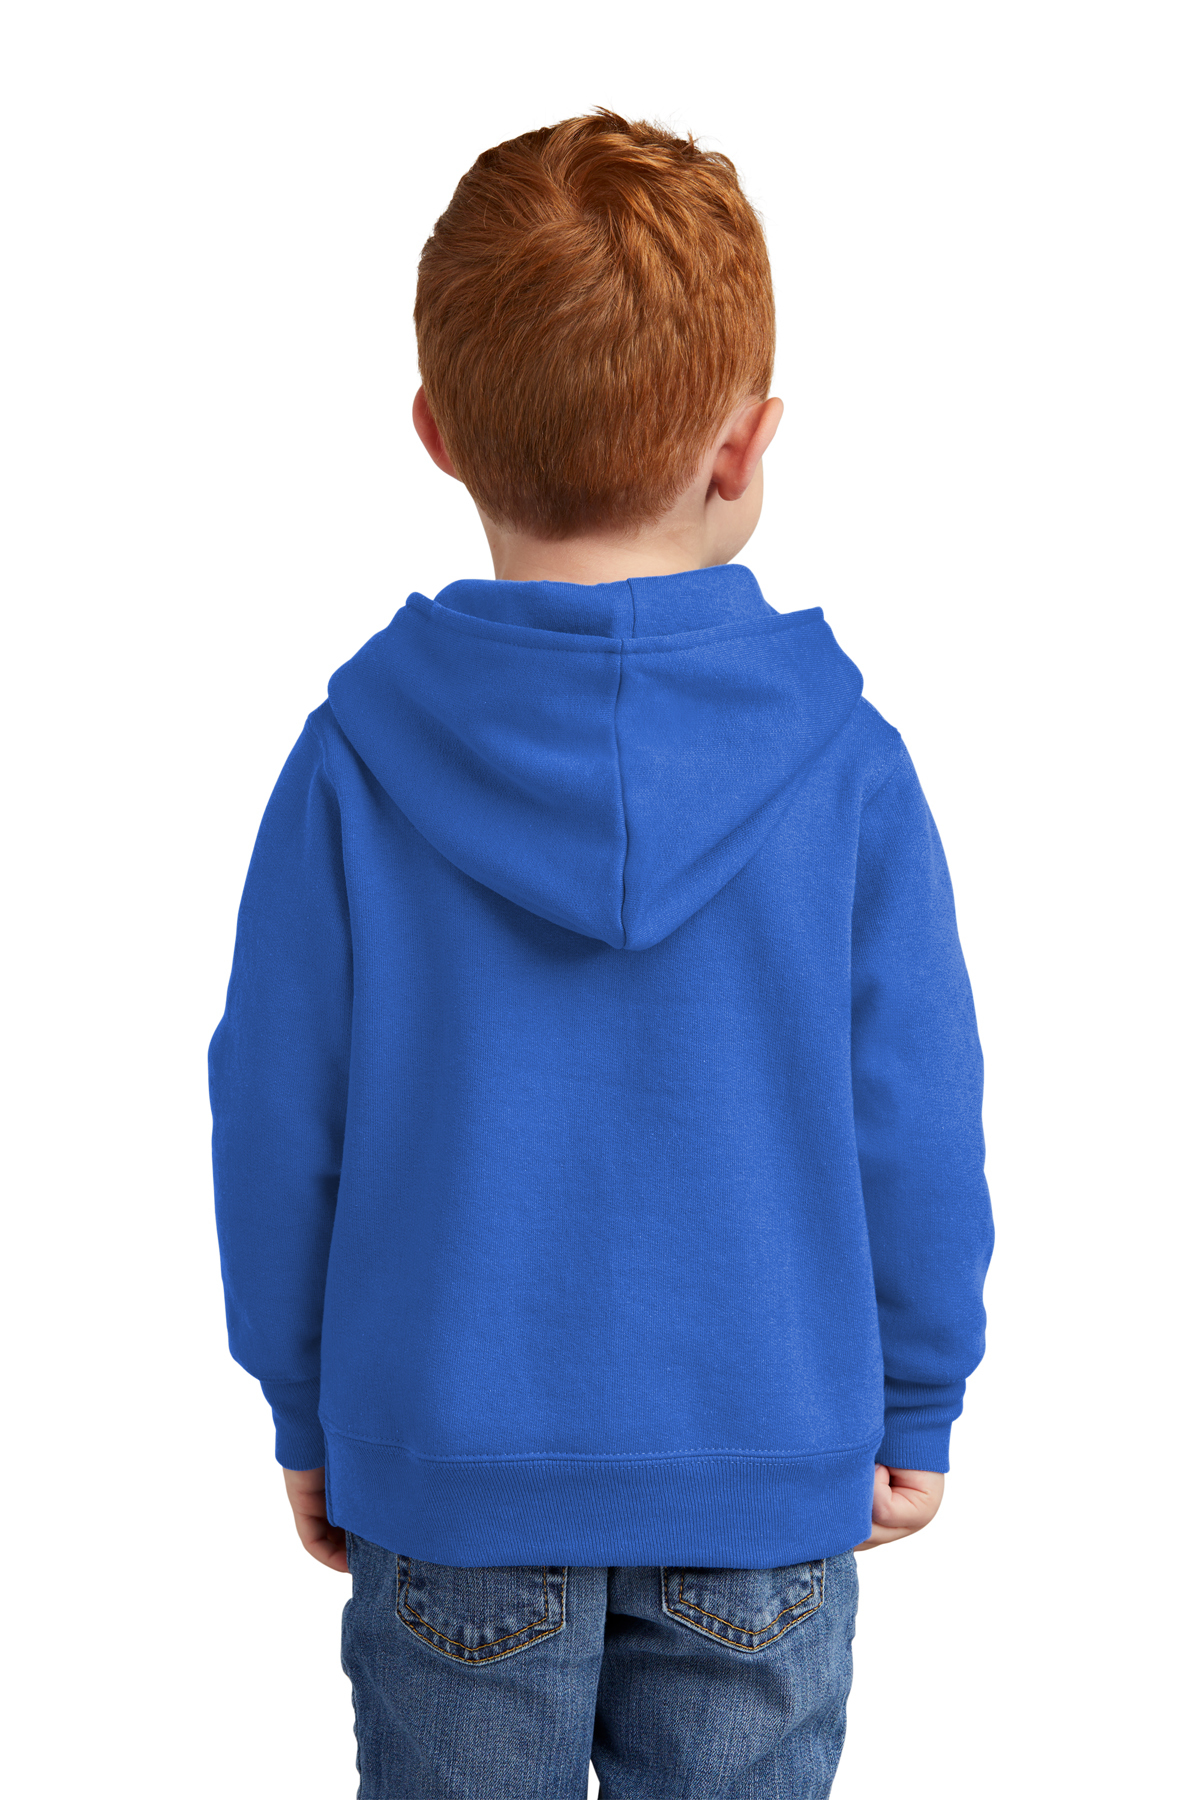 Port & Company Toddler Fleece Core Company & Hooded Product Pullover Port Sweatshirt | 